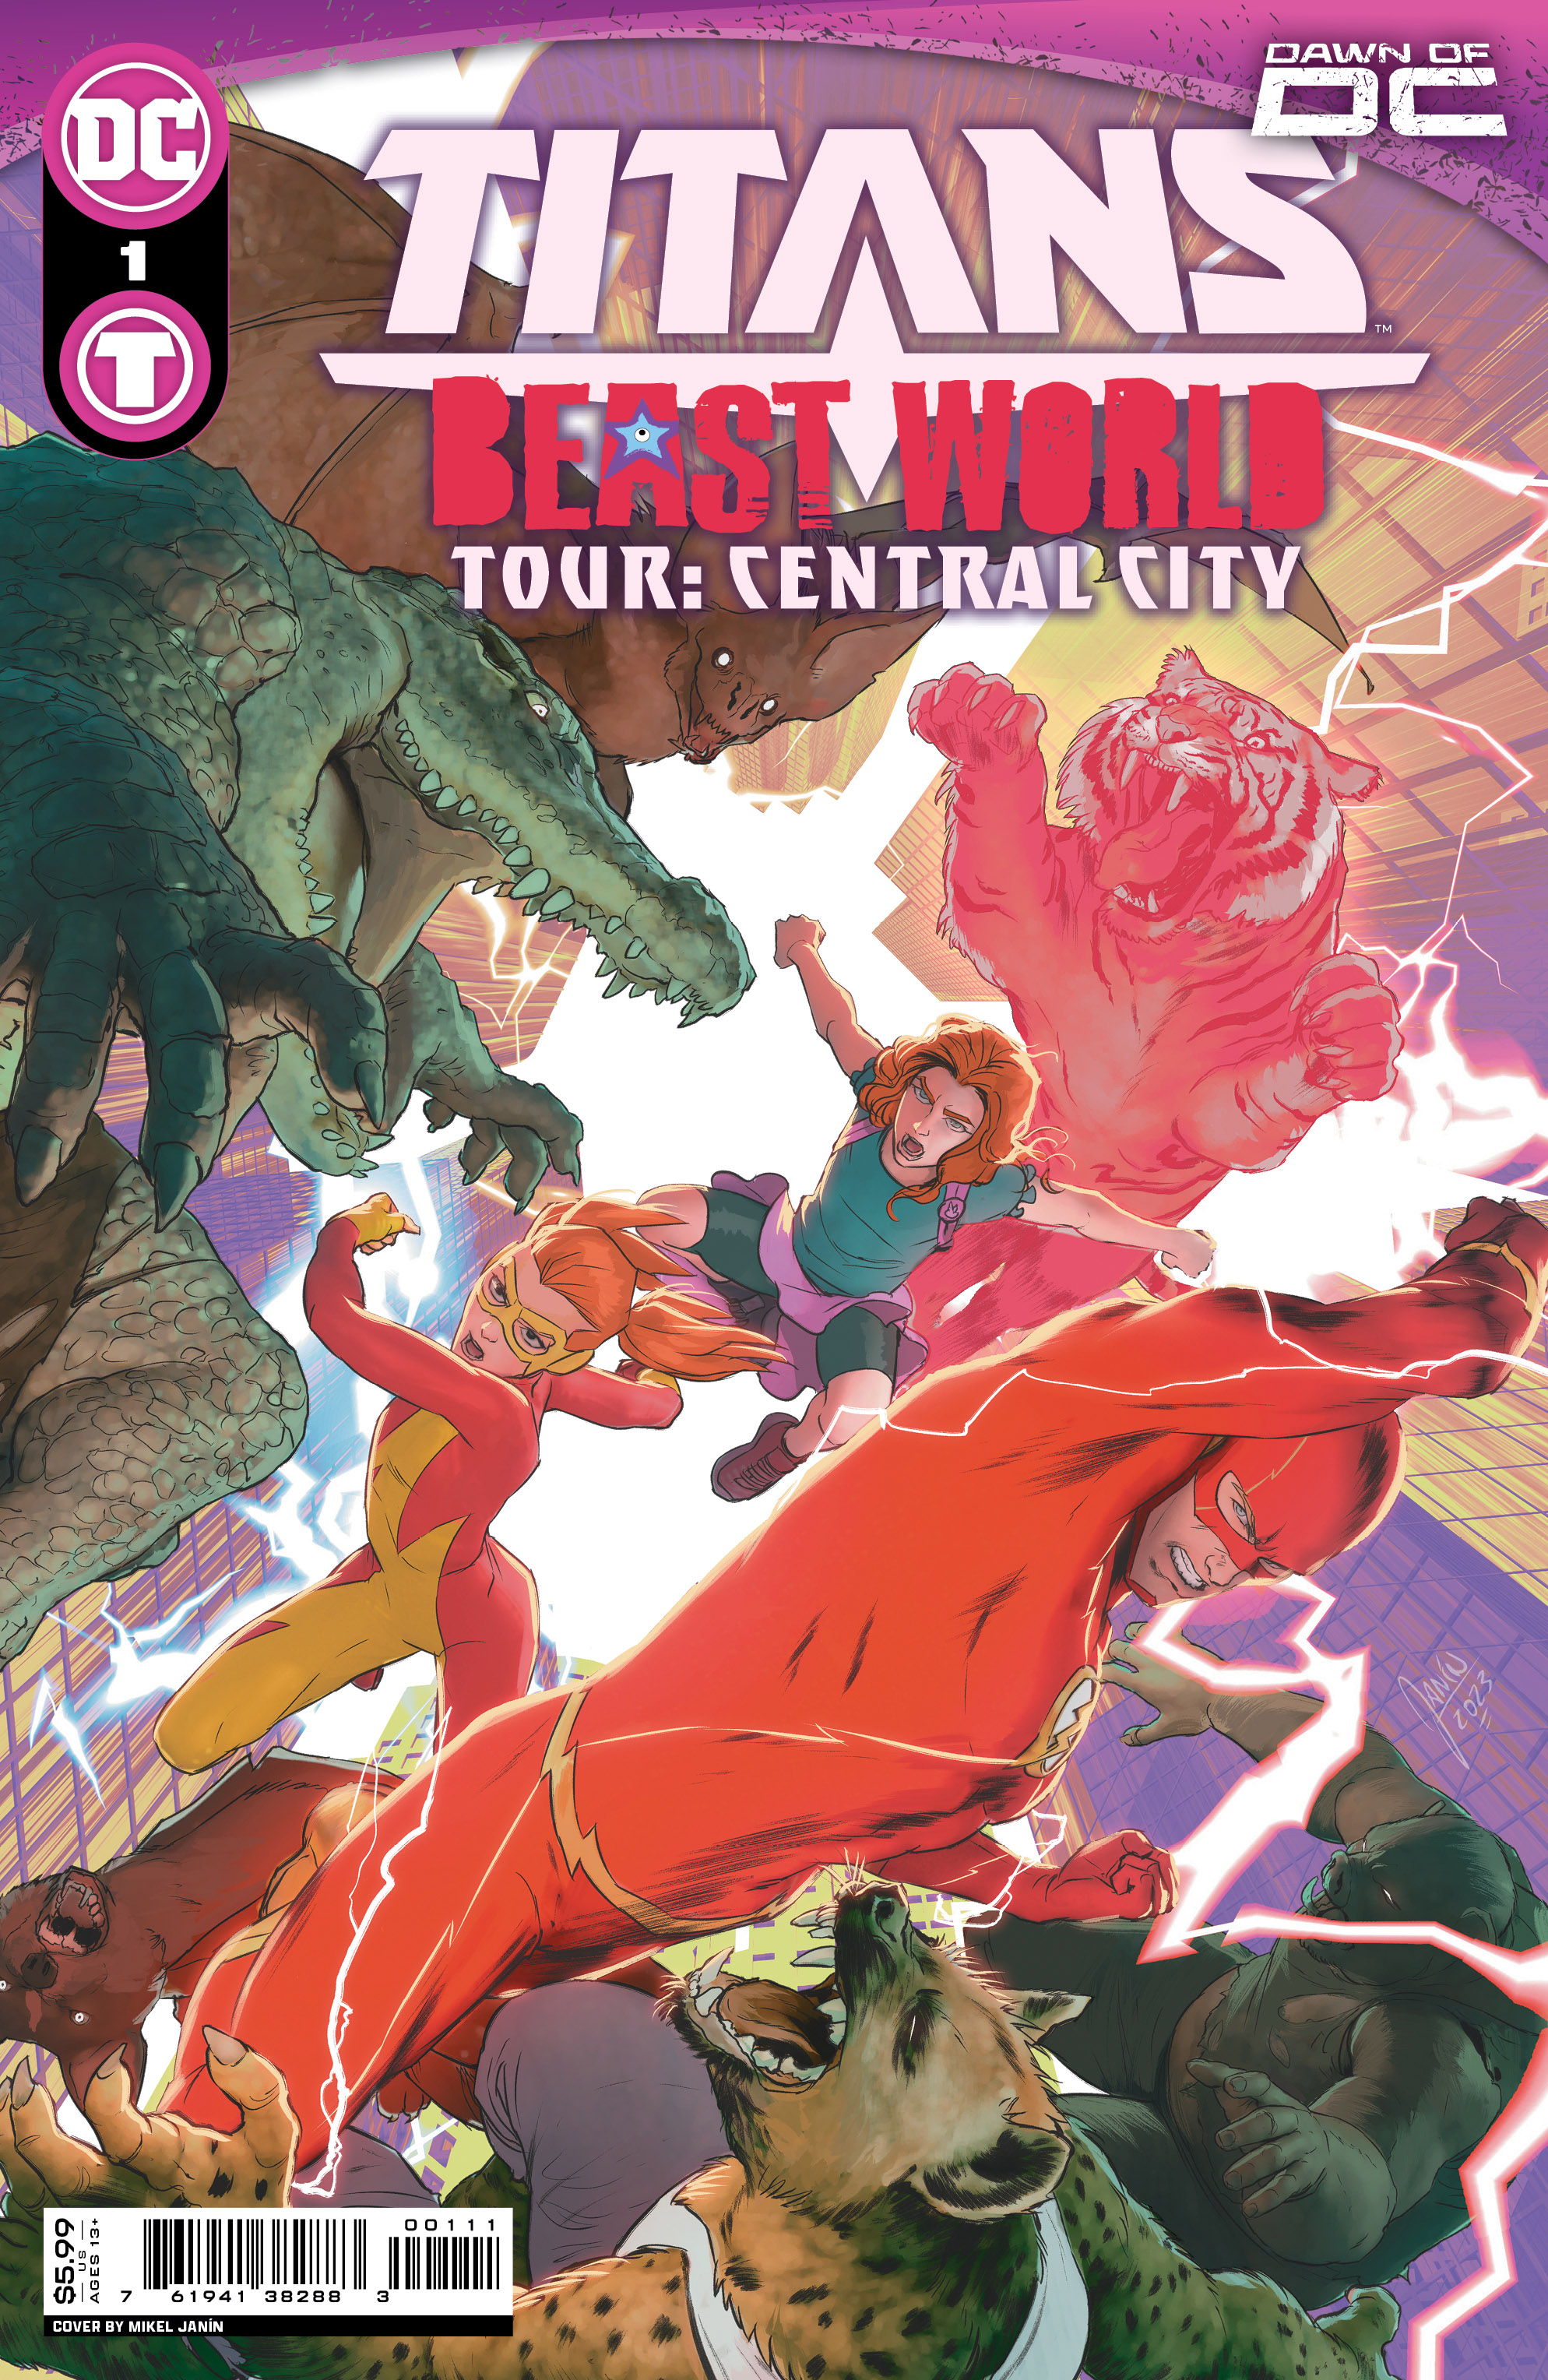 Titans Beast World Tour Central City #1 (One Shot) Cover A Mikel Janin